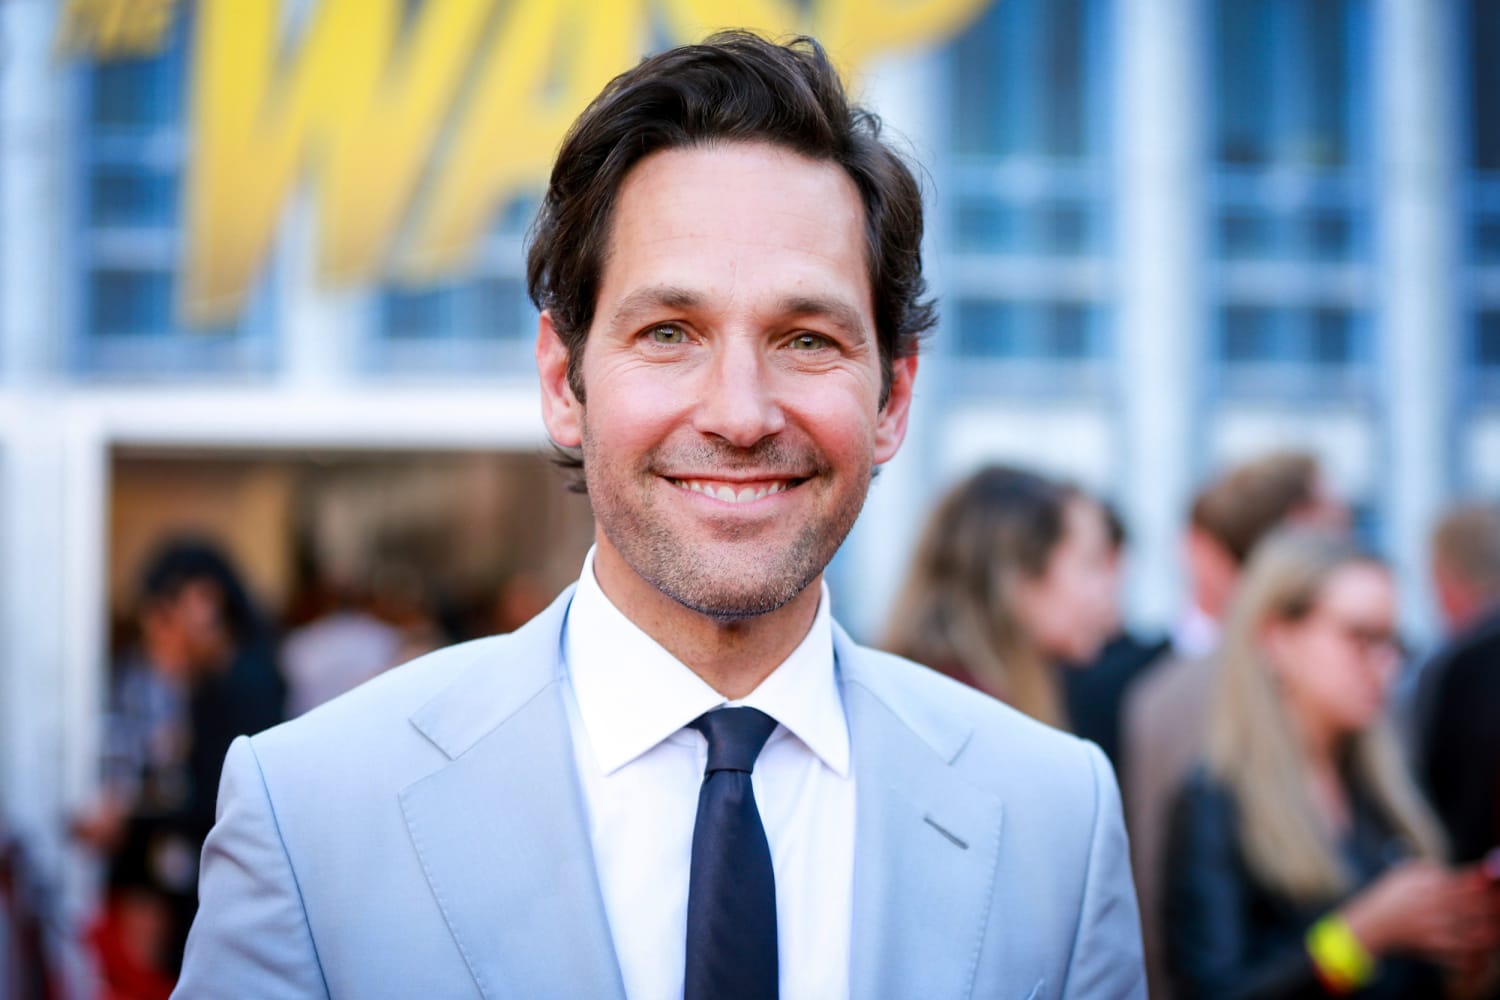 Paul Rudd is named People magazine’s Sexiest Man Alive 2021